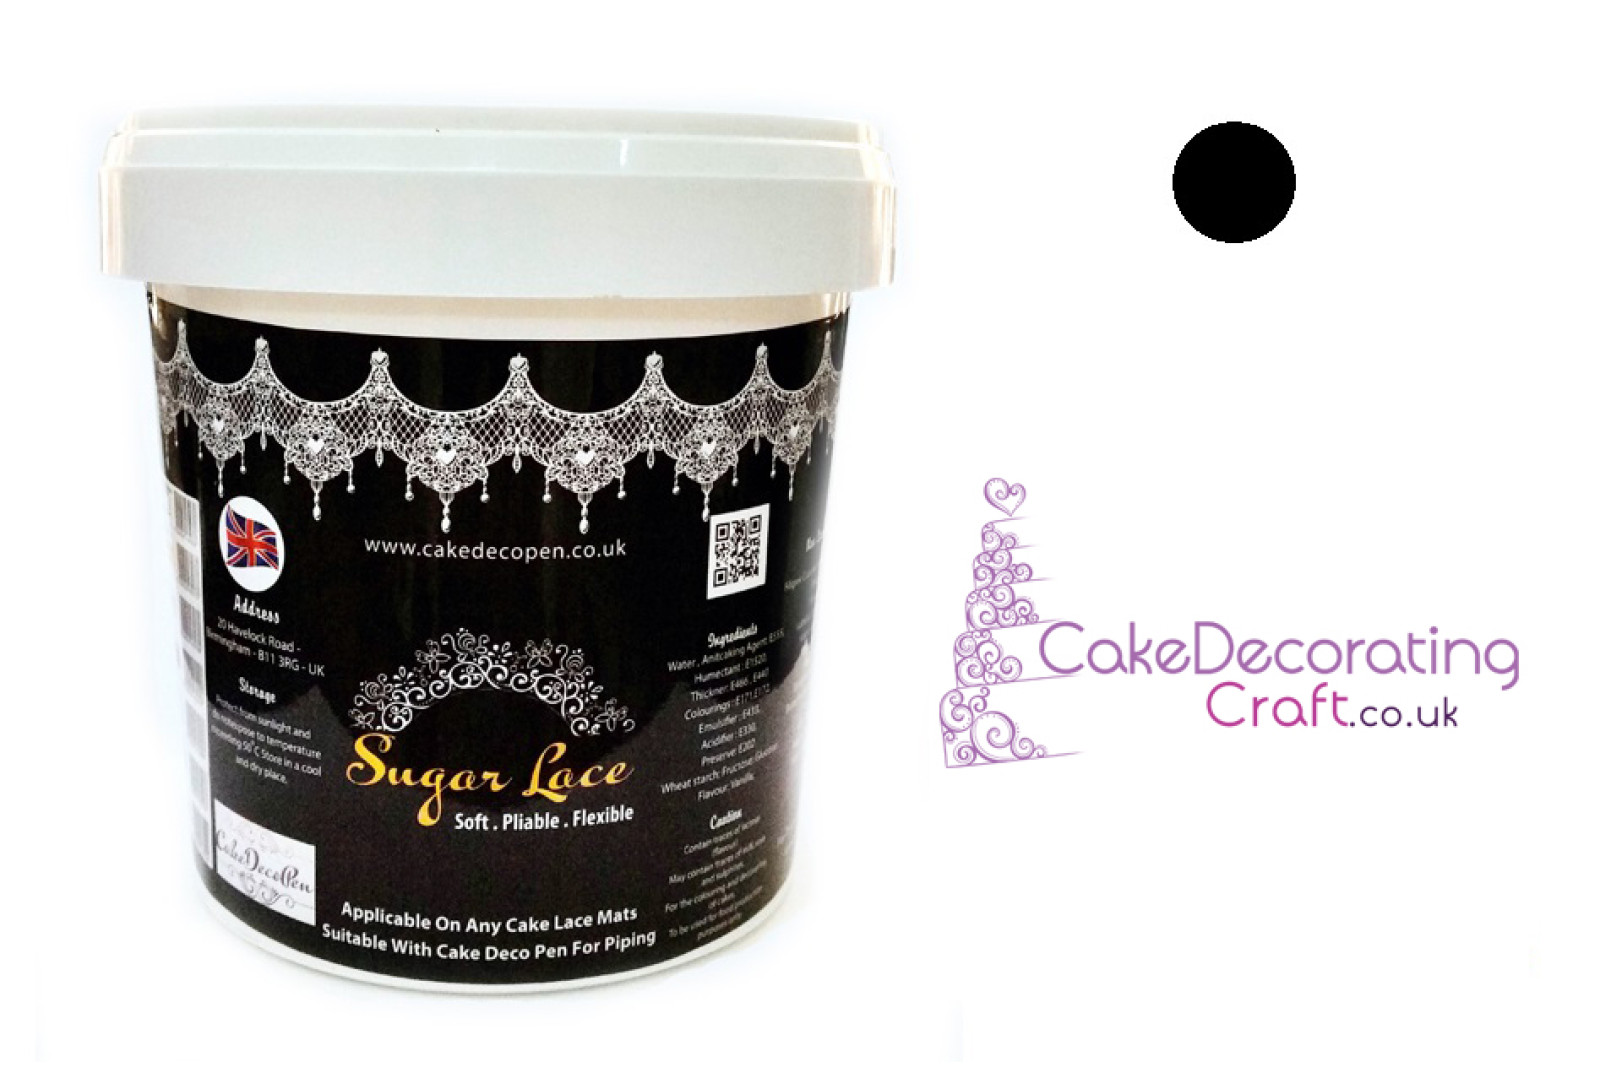 Black | Edible Cake Lace Premix | 200 Grams |  Applicable on Cake Lace Mats | Cake Decorating Craft Tool